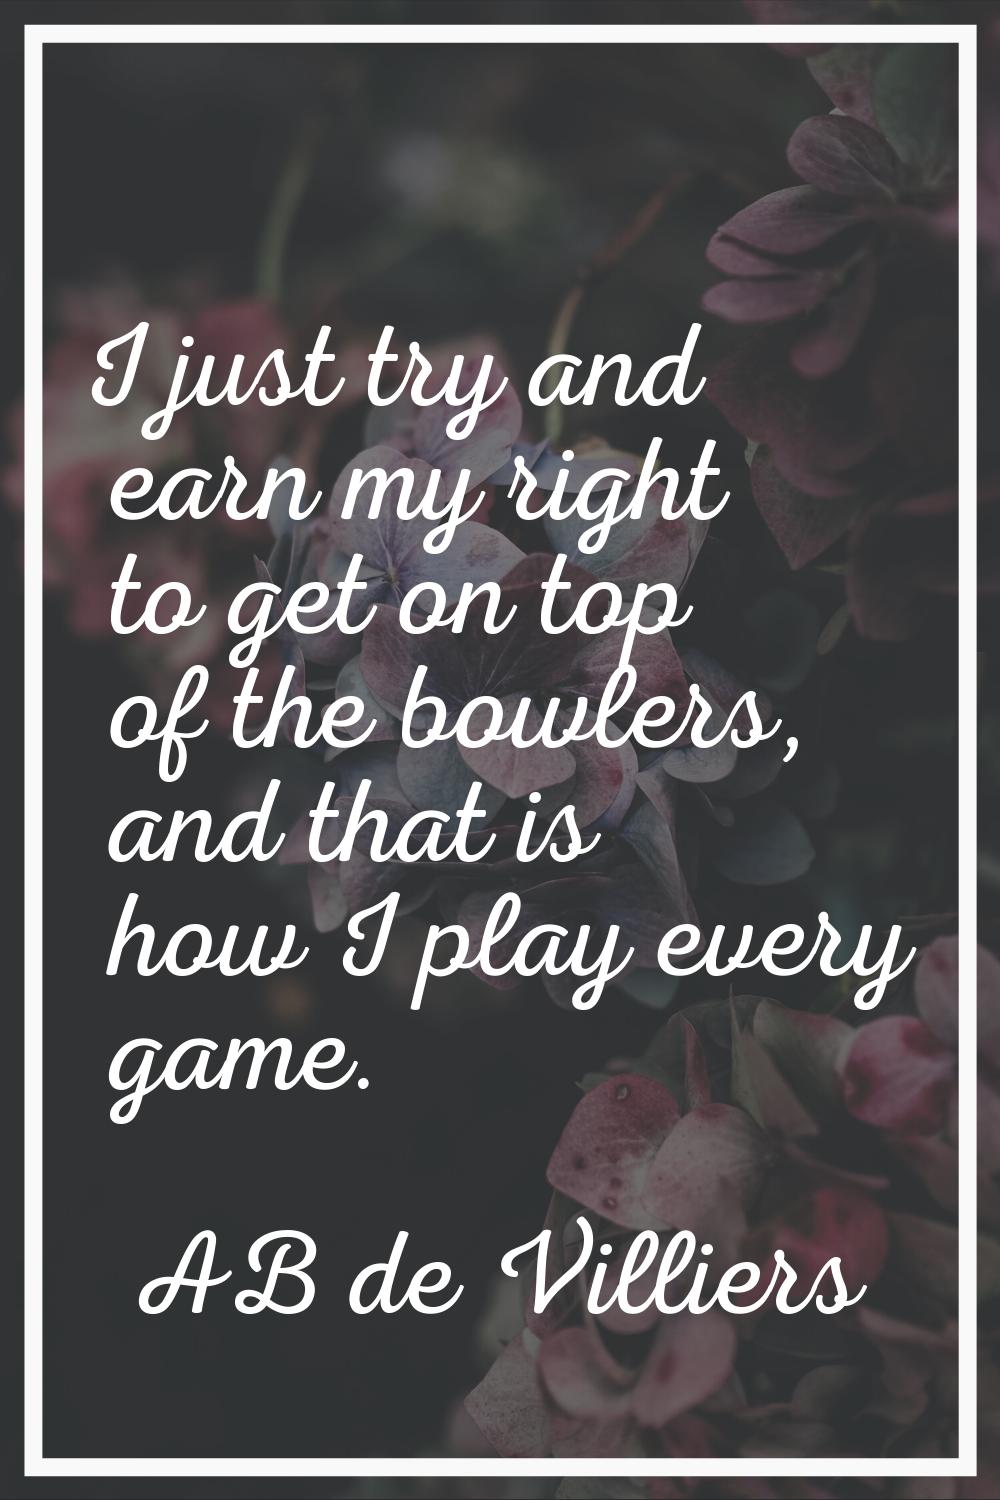 I just try and earn my right to get on top of the bowlers, and that is how I play every game.